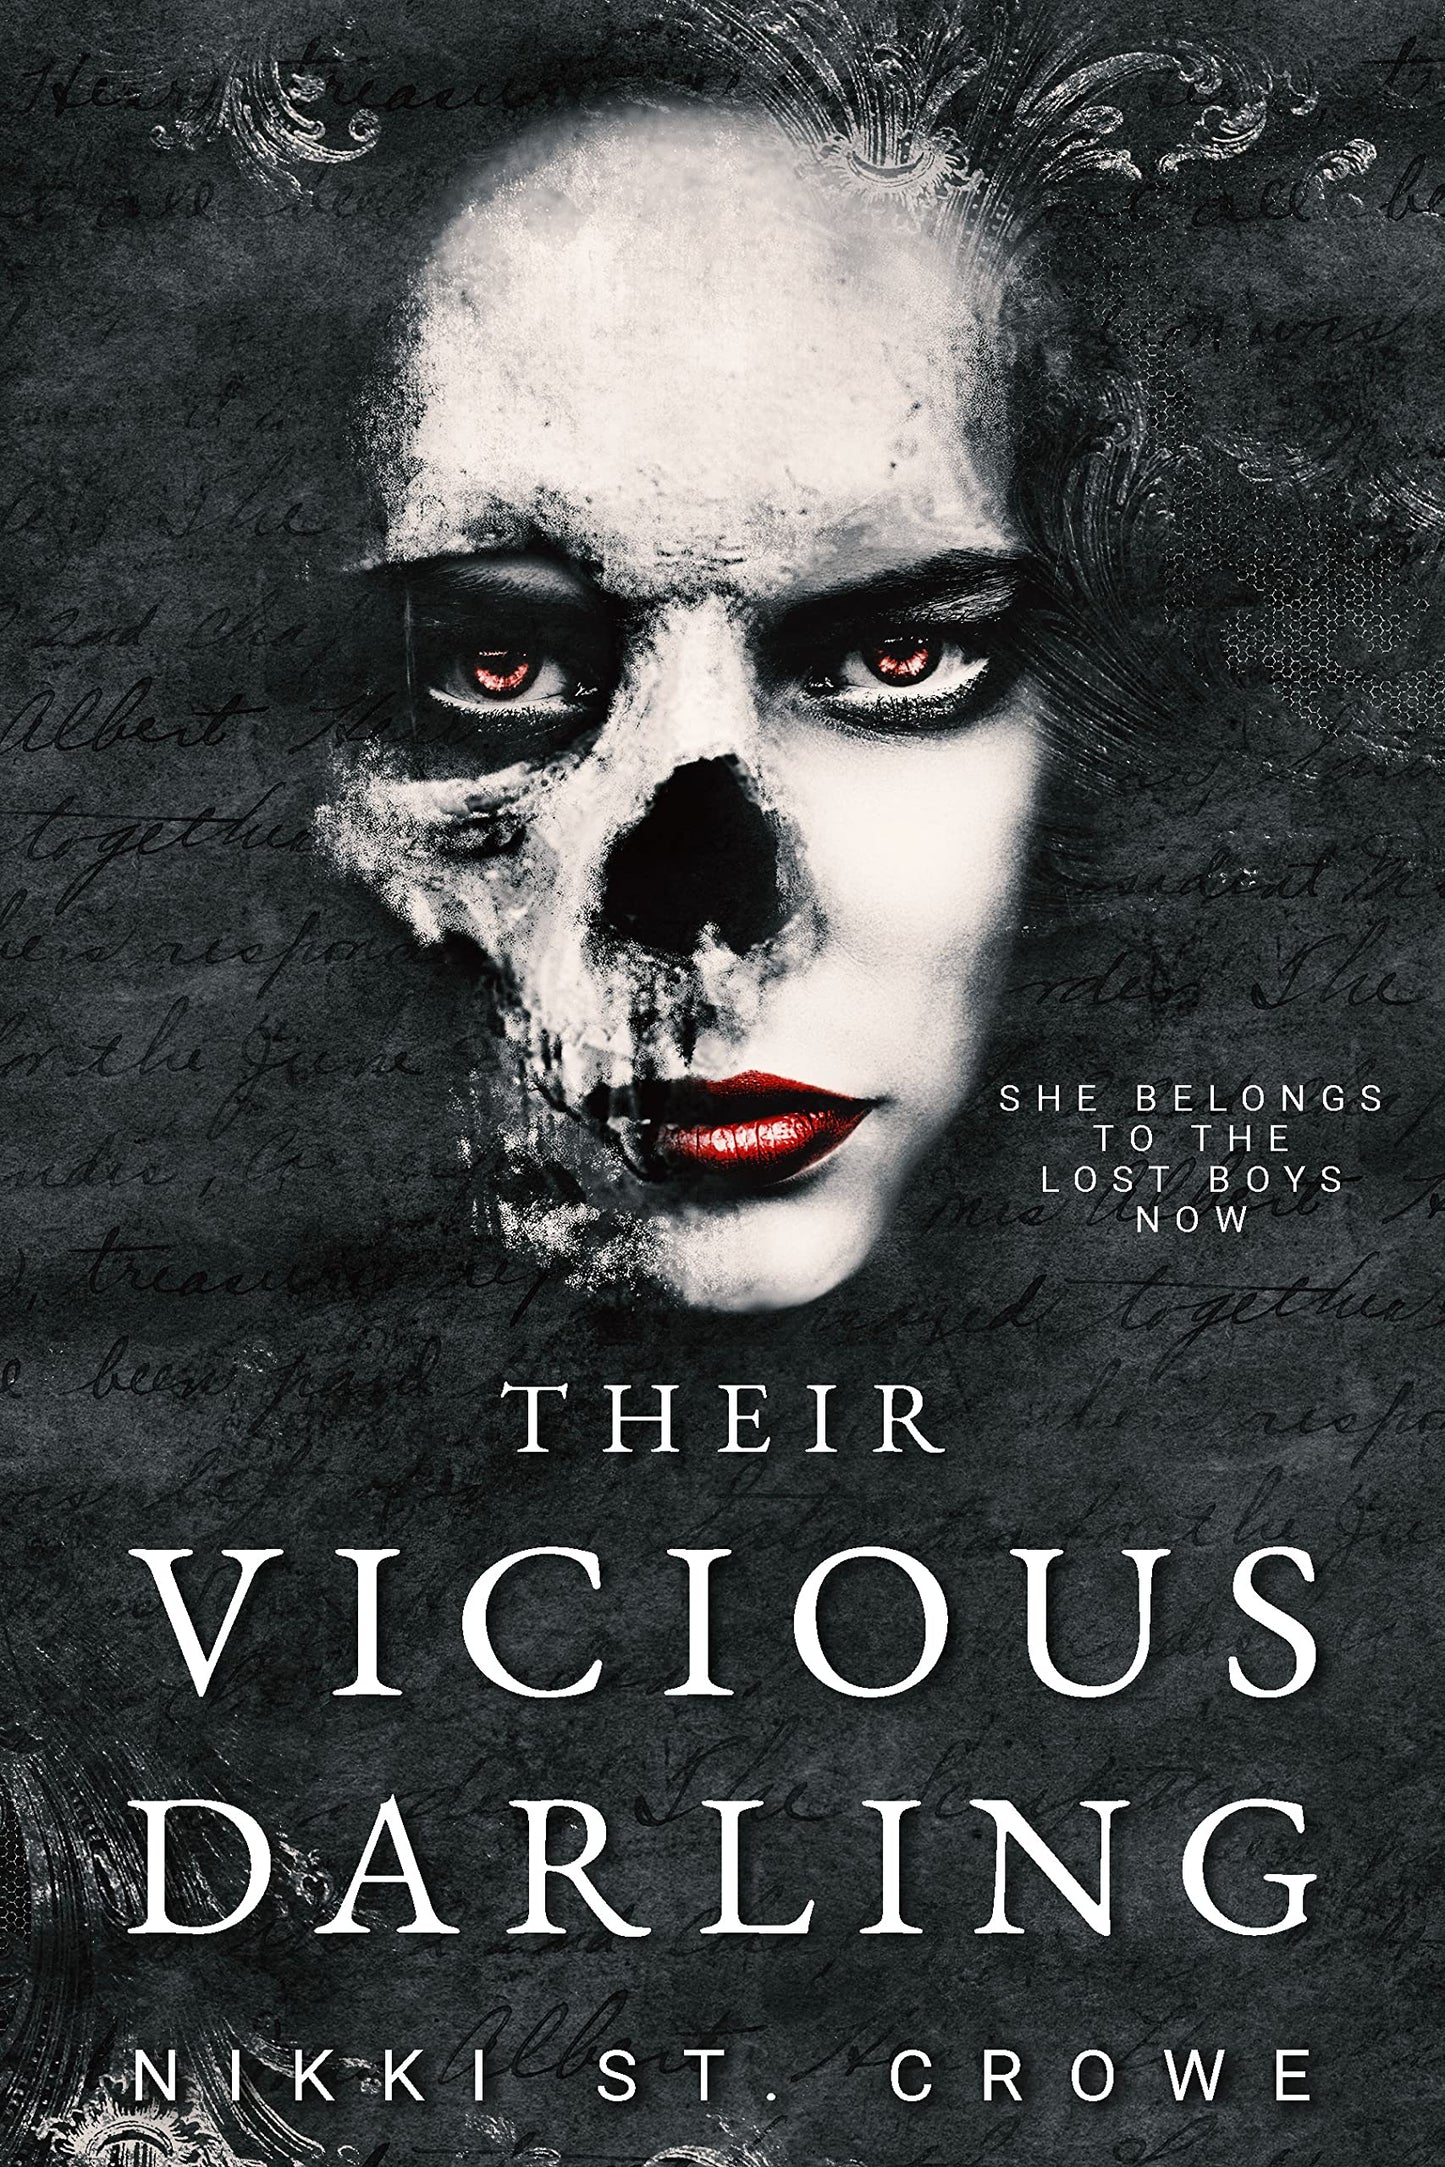 The Vicious Darling - Nikki St. Crowe